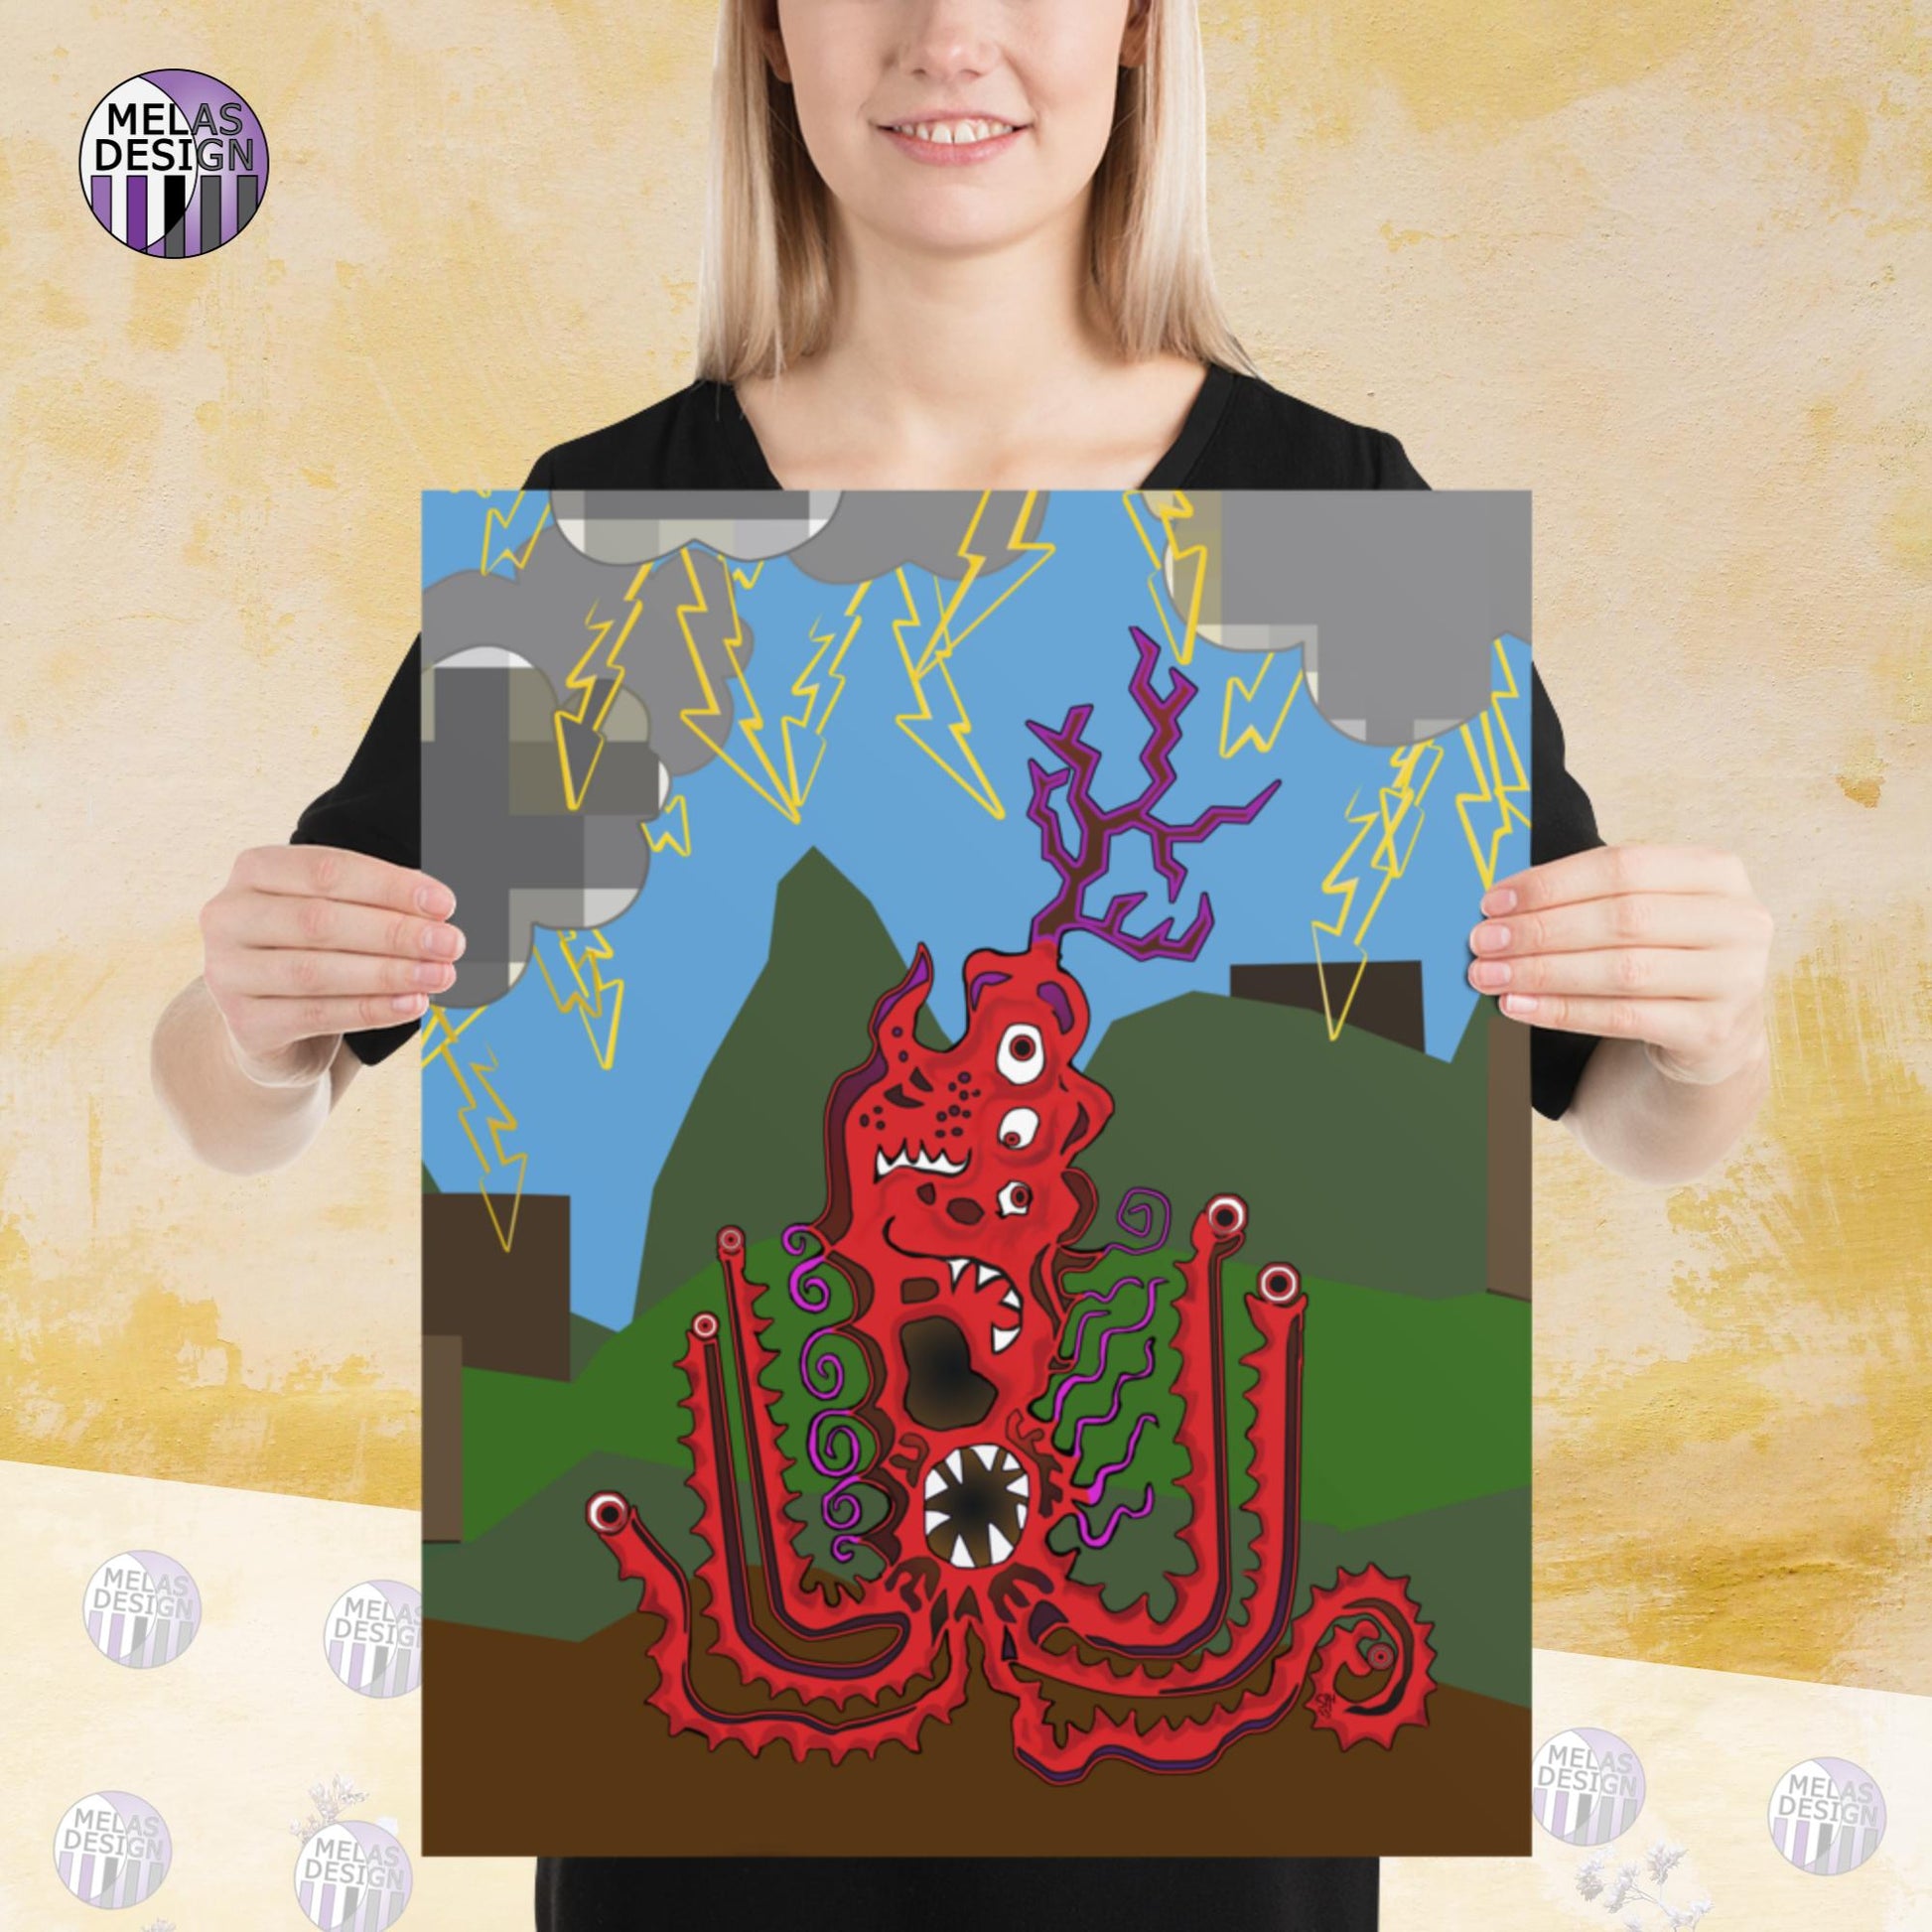 silly; red; horned monster; tentacles with eyes; many mouths; thunderstorm; Melasdesign; sold by artist